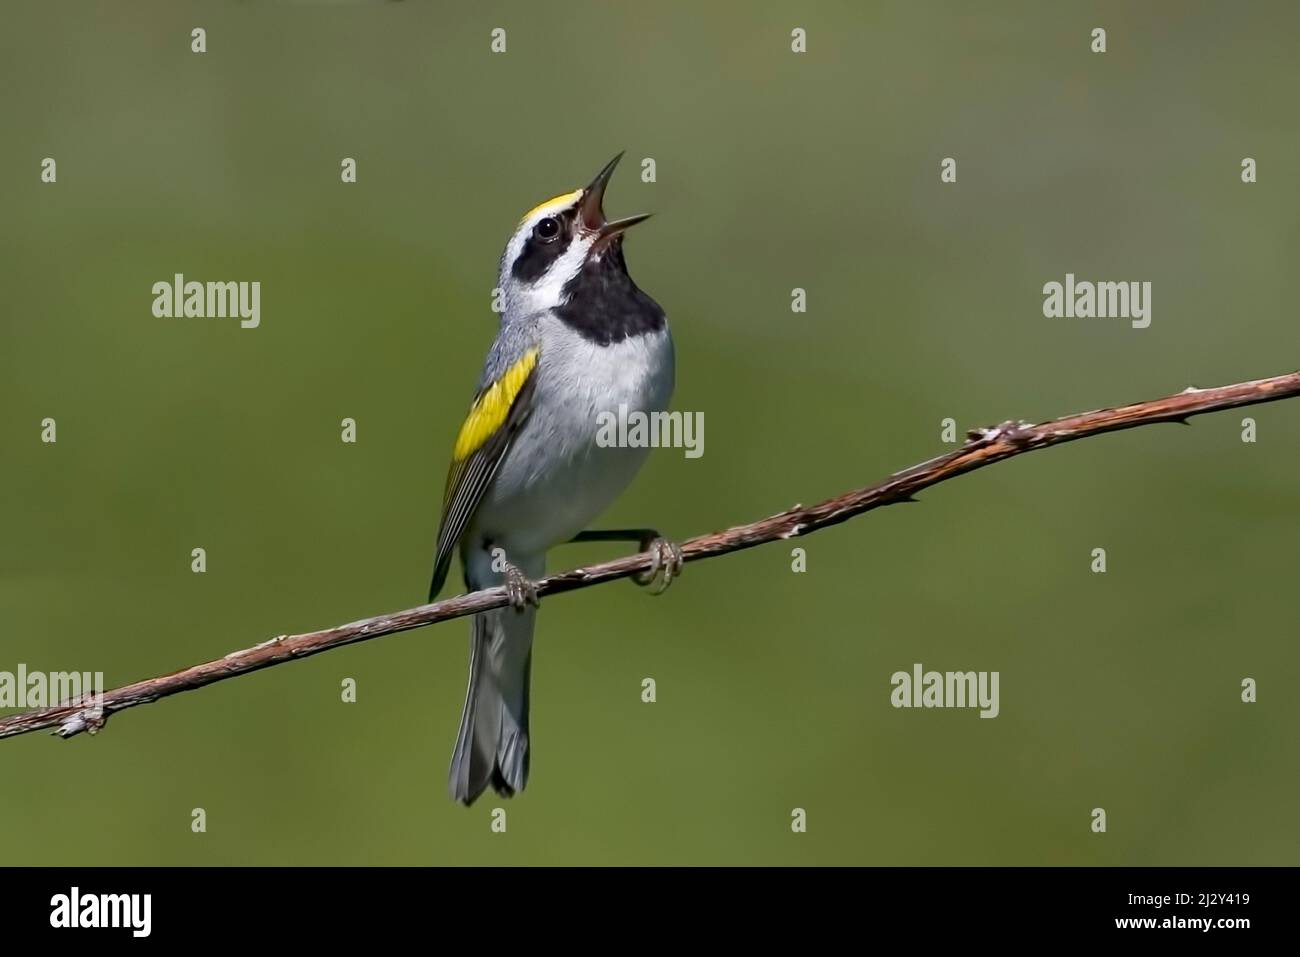 A Golden-winged Warbler, Vermivora chrysoptera, singing from a vine Stock Photo